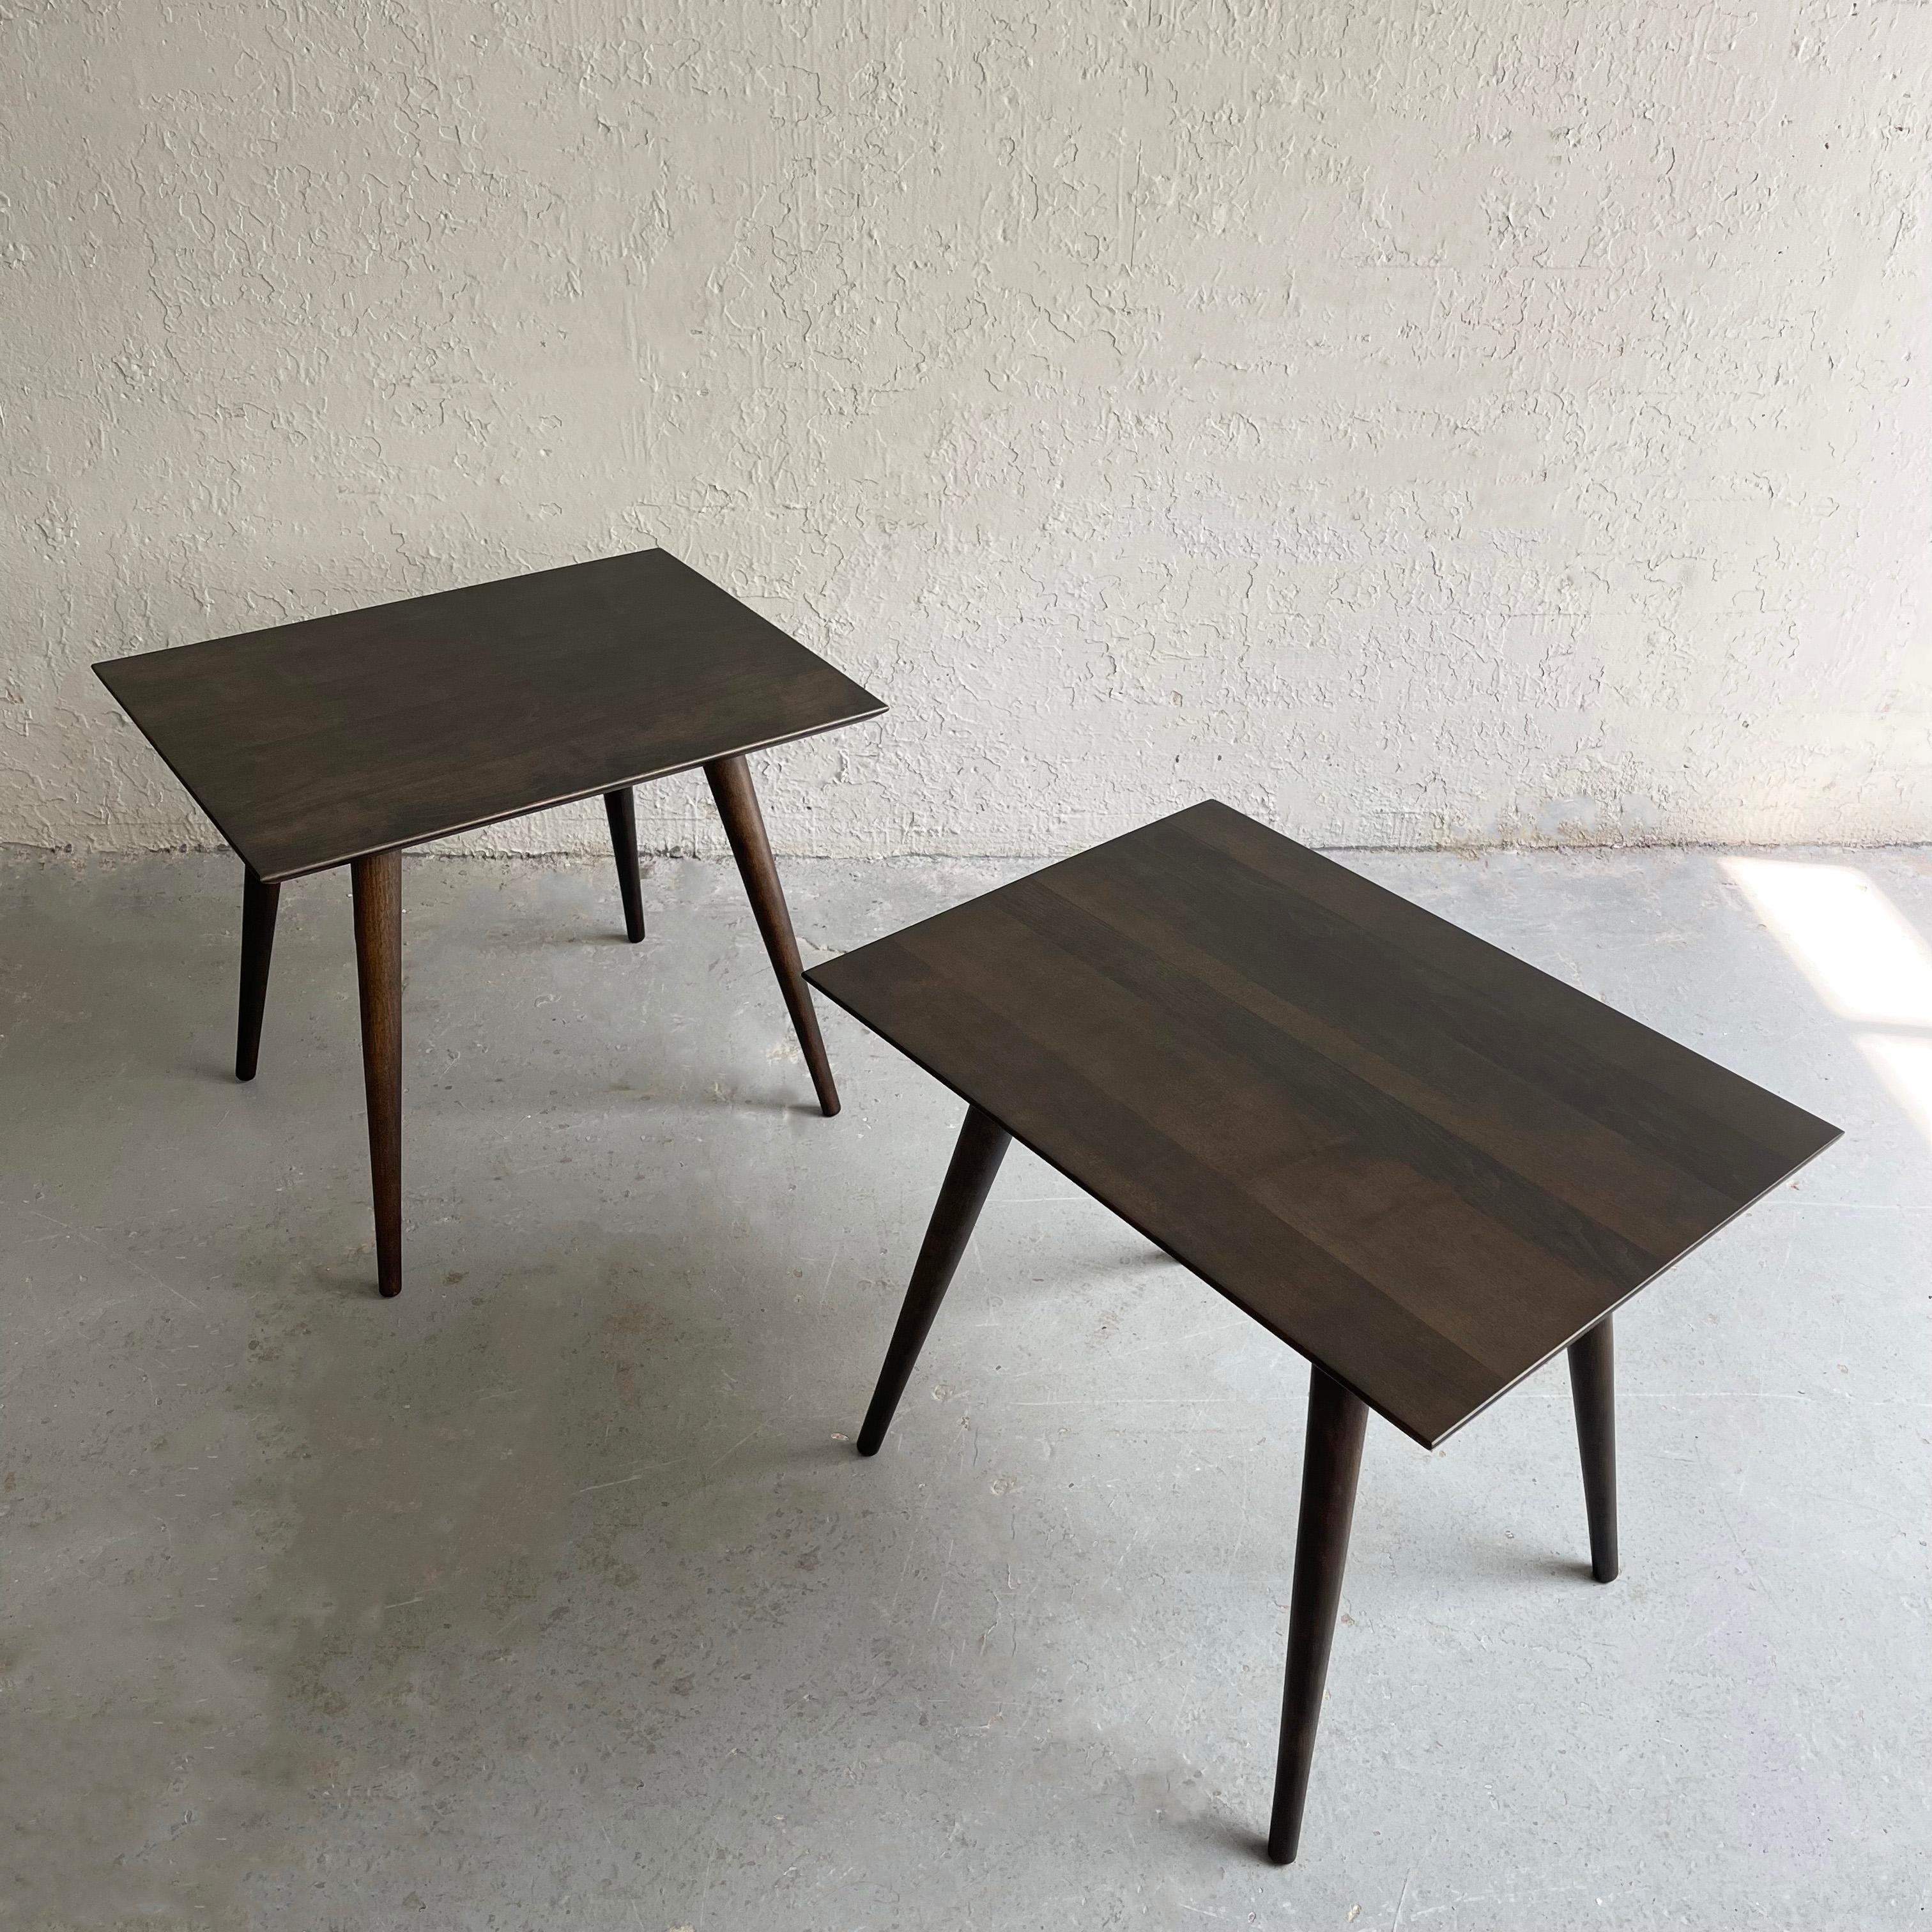 Pair of Classic Mid-Century Modern, maple side tables by Paul McCobb for Planner Group, Winchendon feature an ebonized finish.